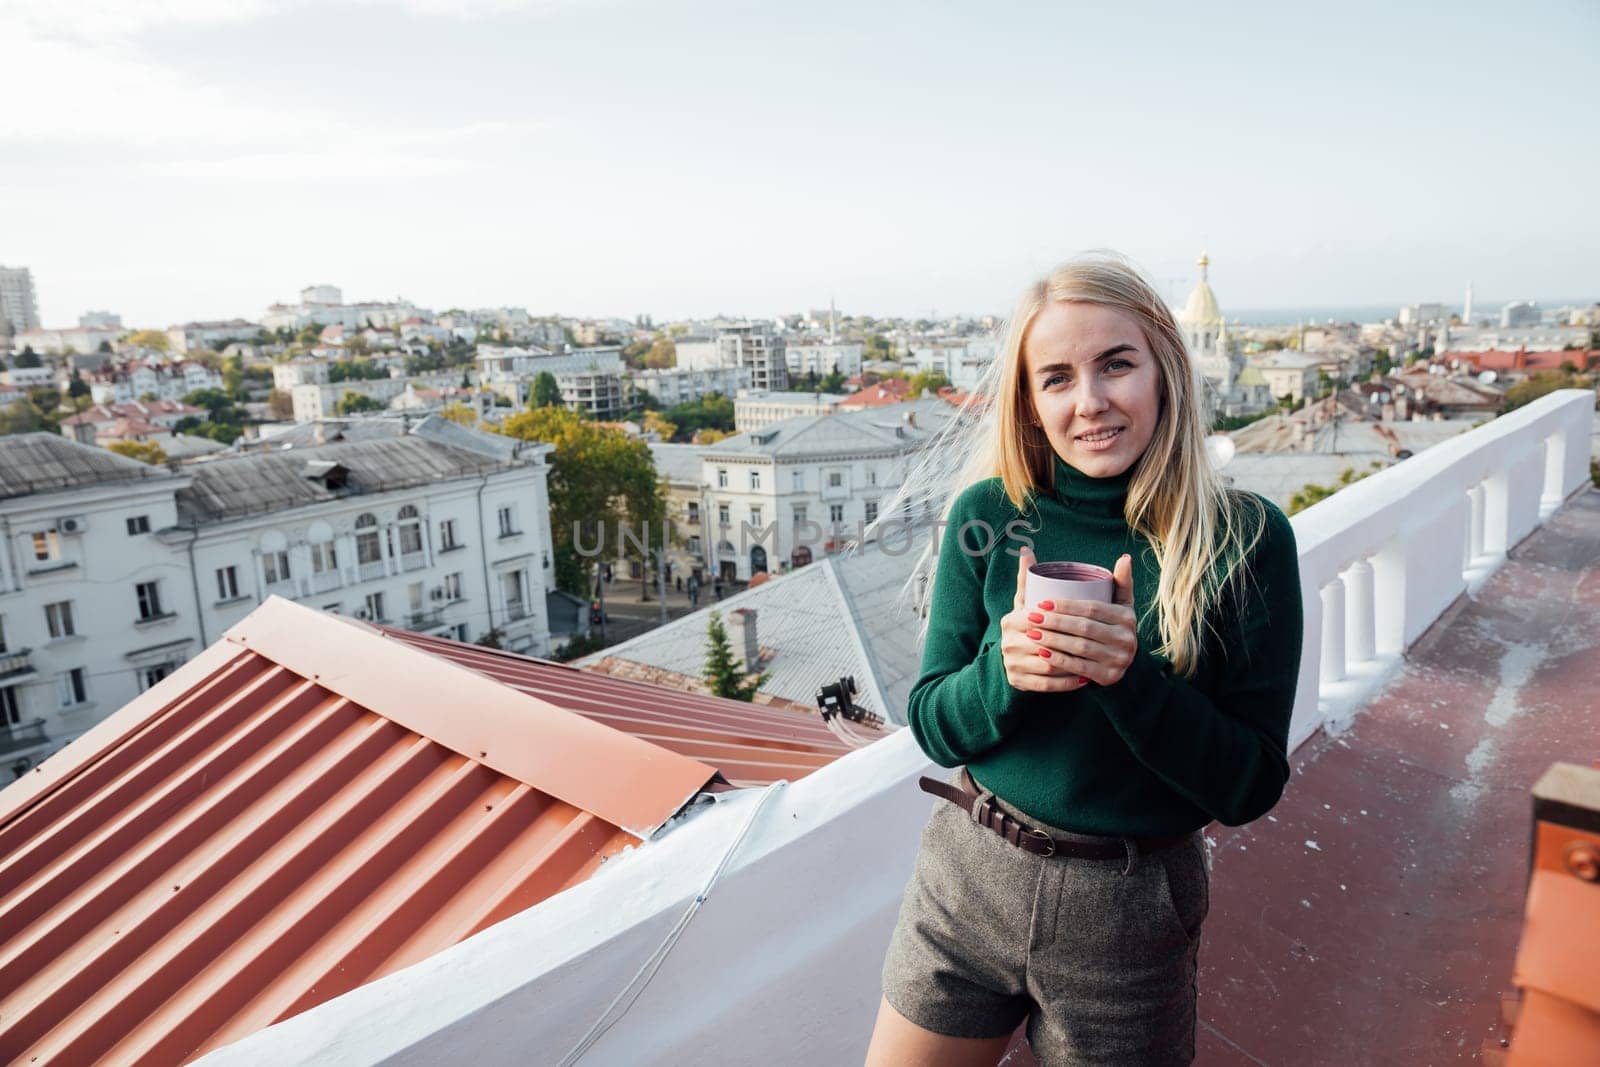 blonde beautiful woman with a mug on the roof of a house on the street